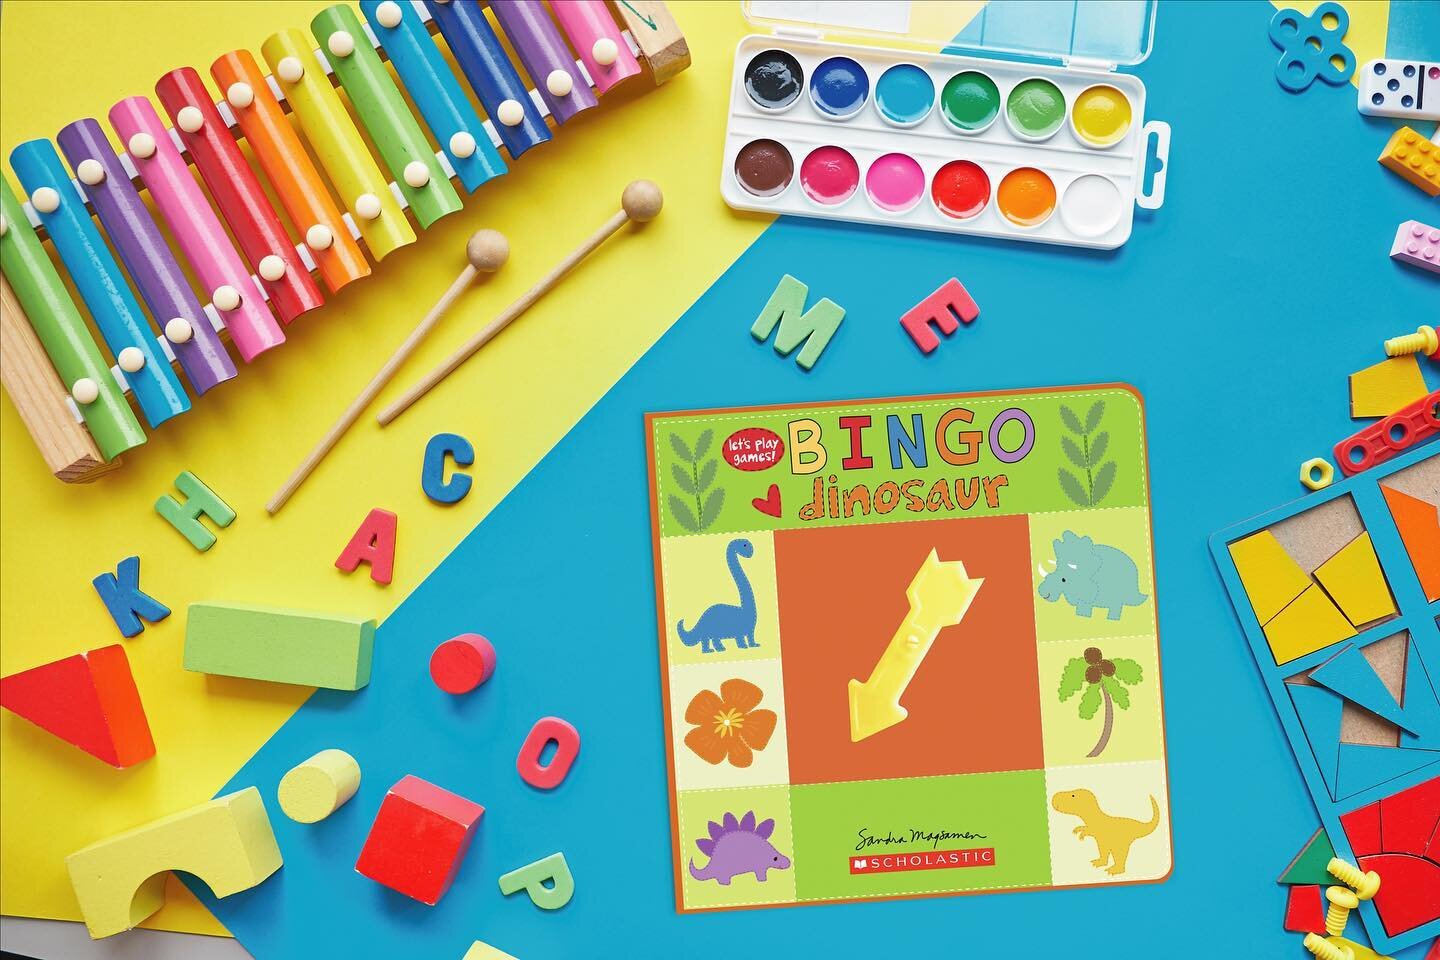 LET&rsquo;S PLAY! &mdash; where you can learn through play every day! 🦕❤️🦖

Inspired by the traditional bingo game but customized to the youngest reader, this game book features fun dinosaurs and tons of roaring fun! The first page flips up to reve